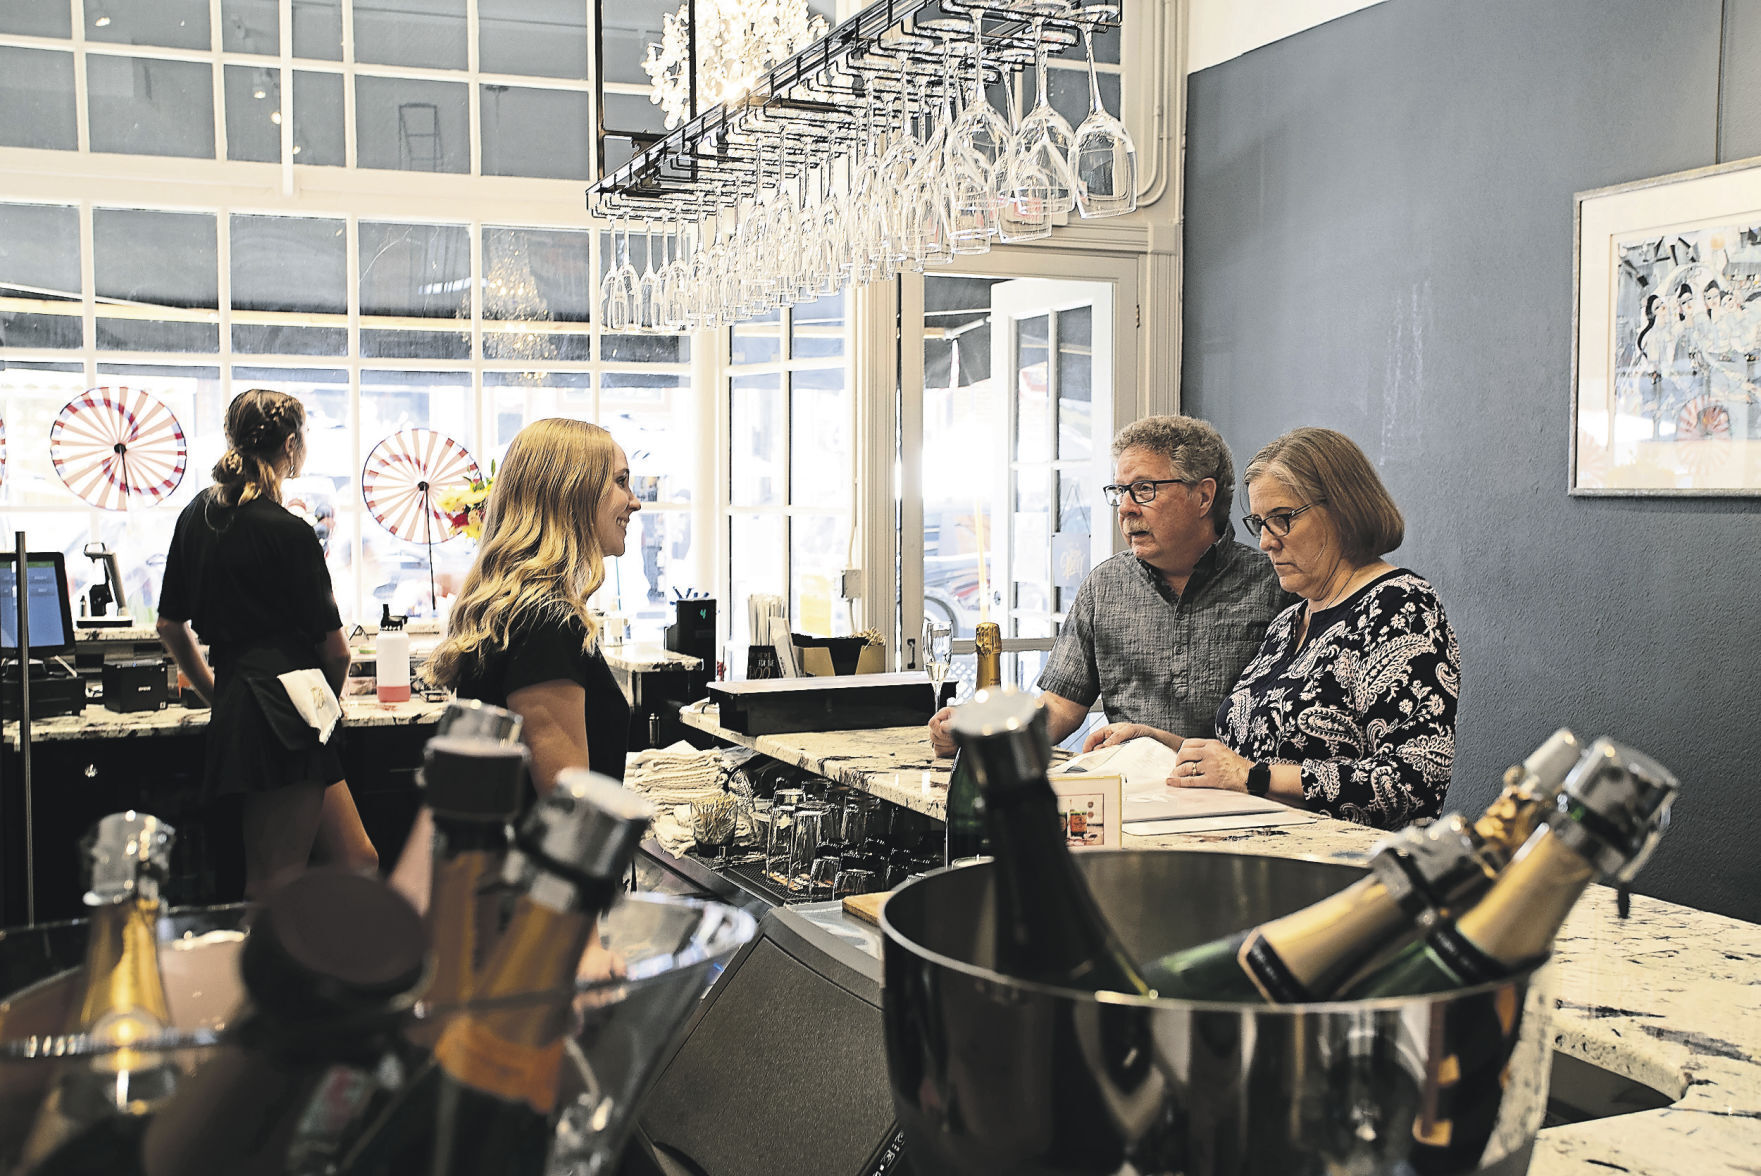 Lilly Streich takes an order from Jim and Lynda Streich at Champagne on Main.    PHOTO CREDIT: SYSTEM